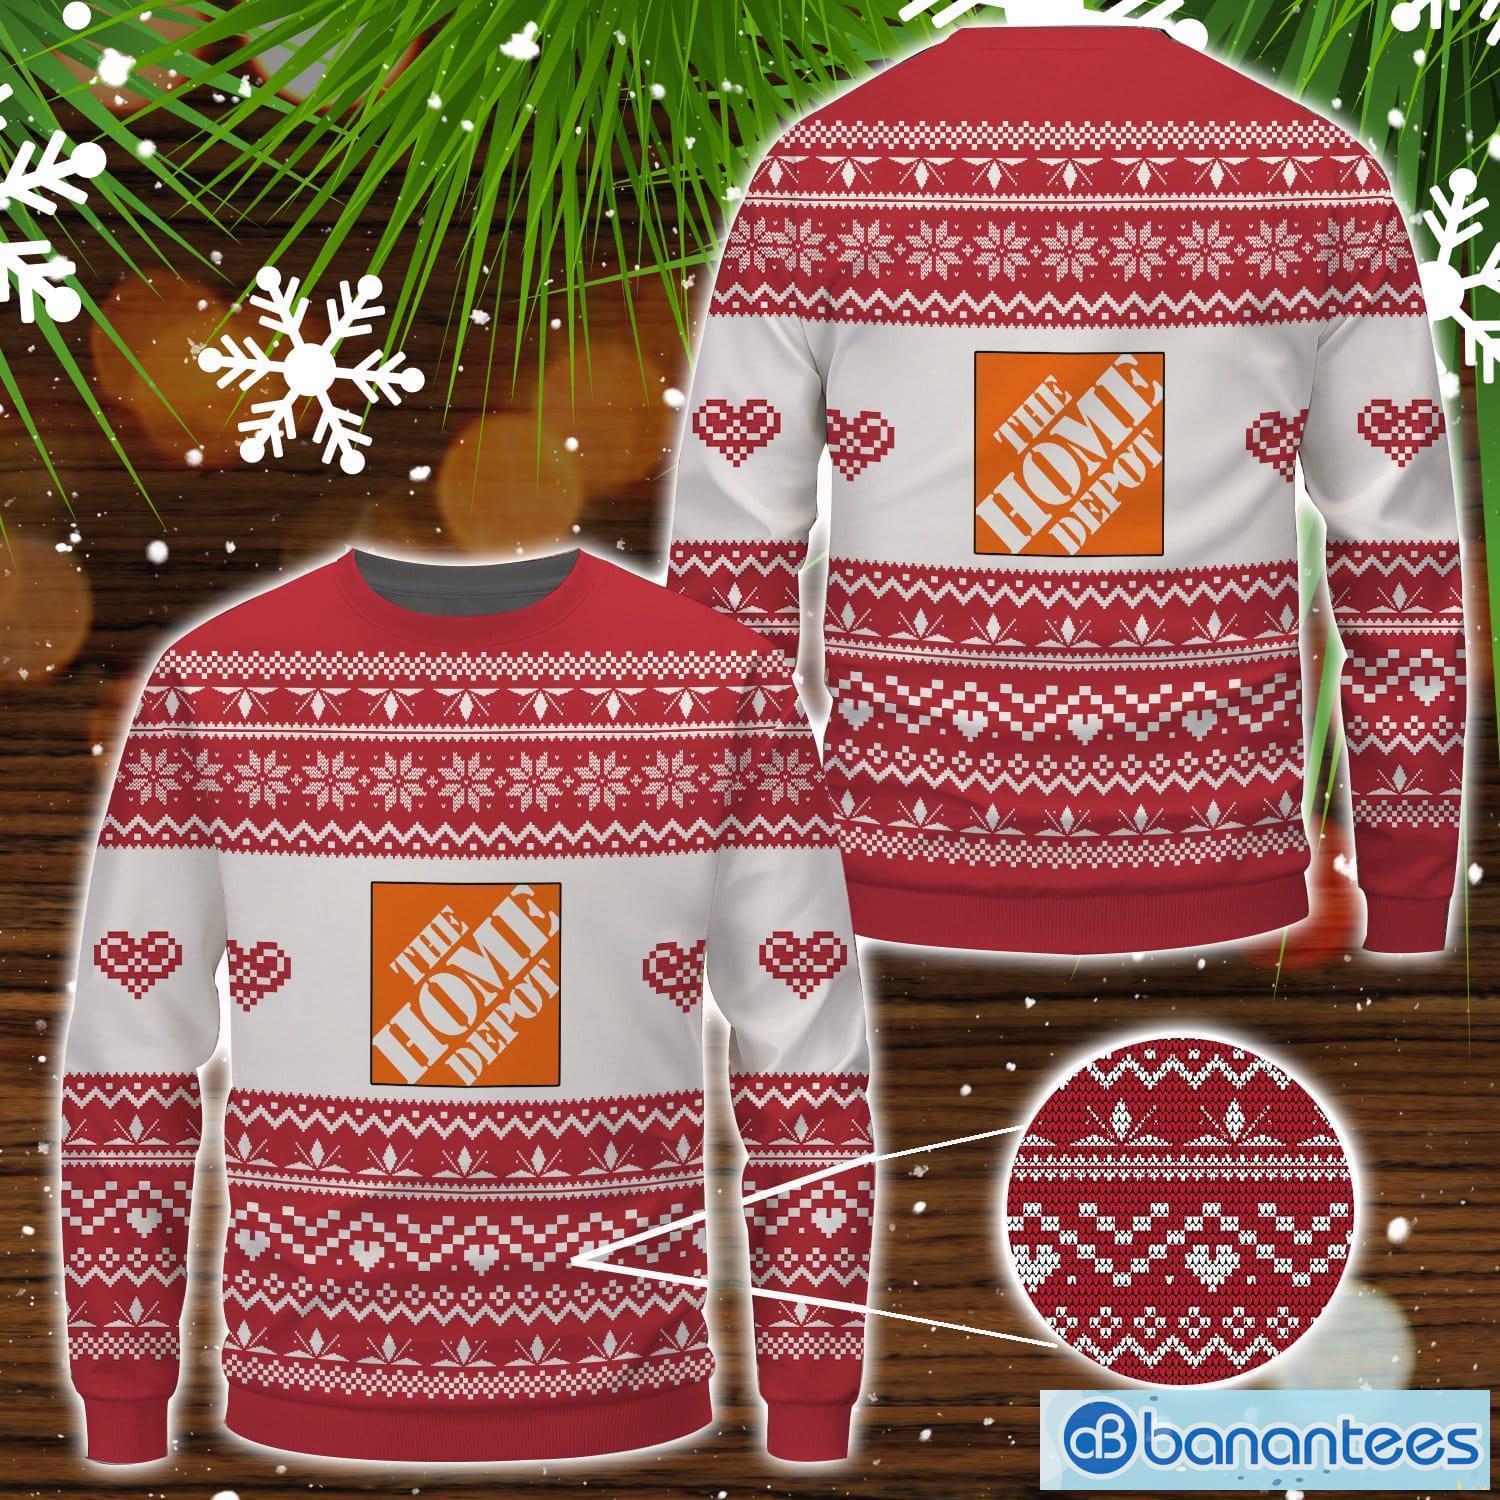 Gift Ideas - The Home Depot